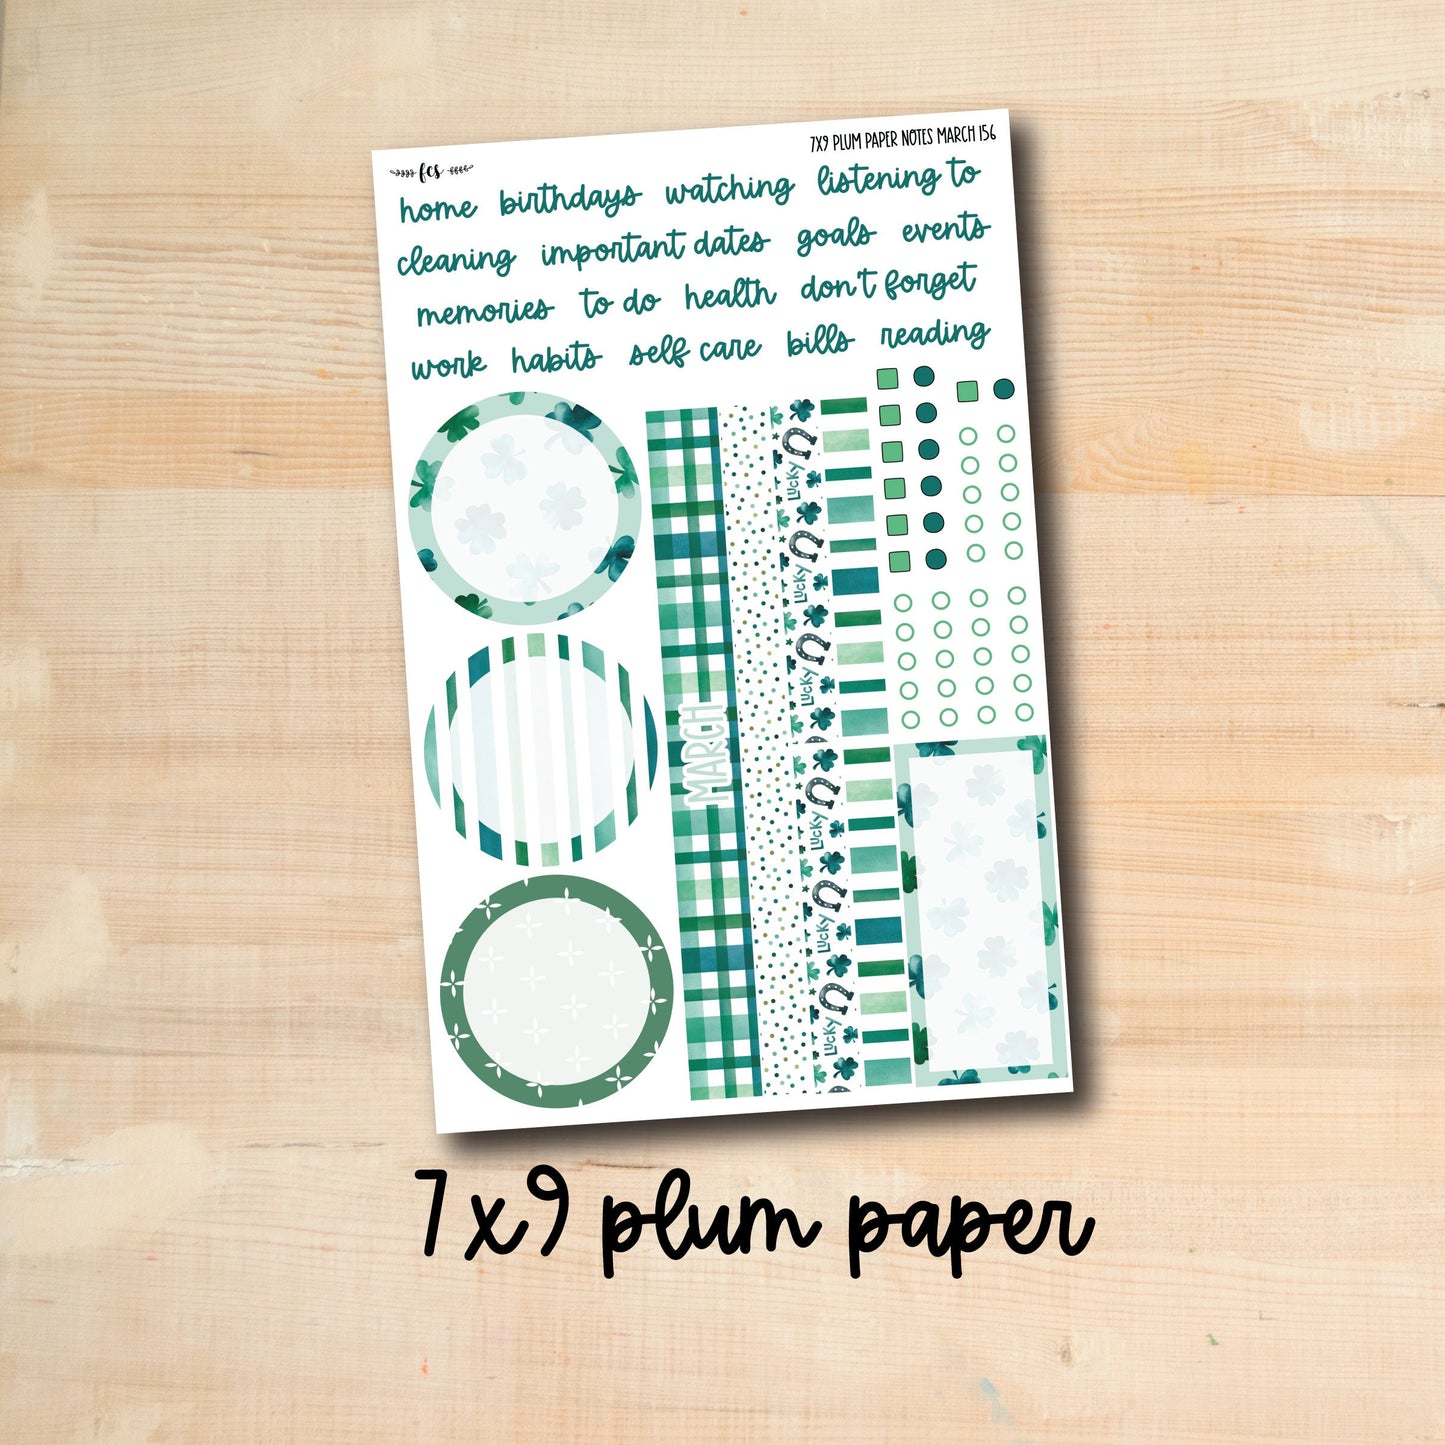 7x9 Plum NOTES-MAR156 || LUCKY 7x9 Plum Paper March notes page